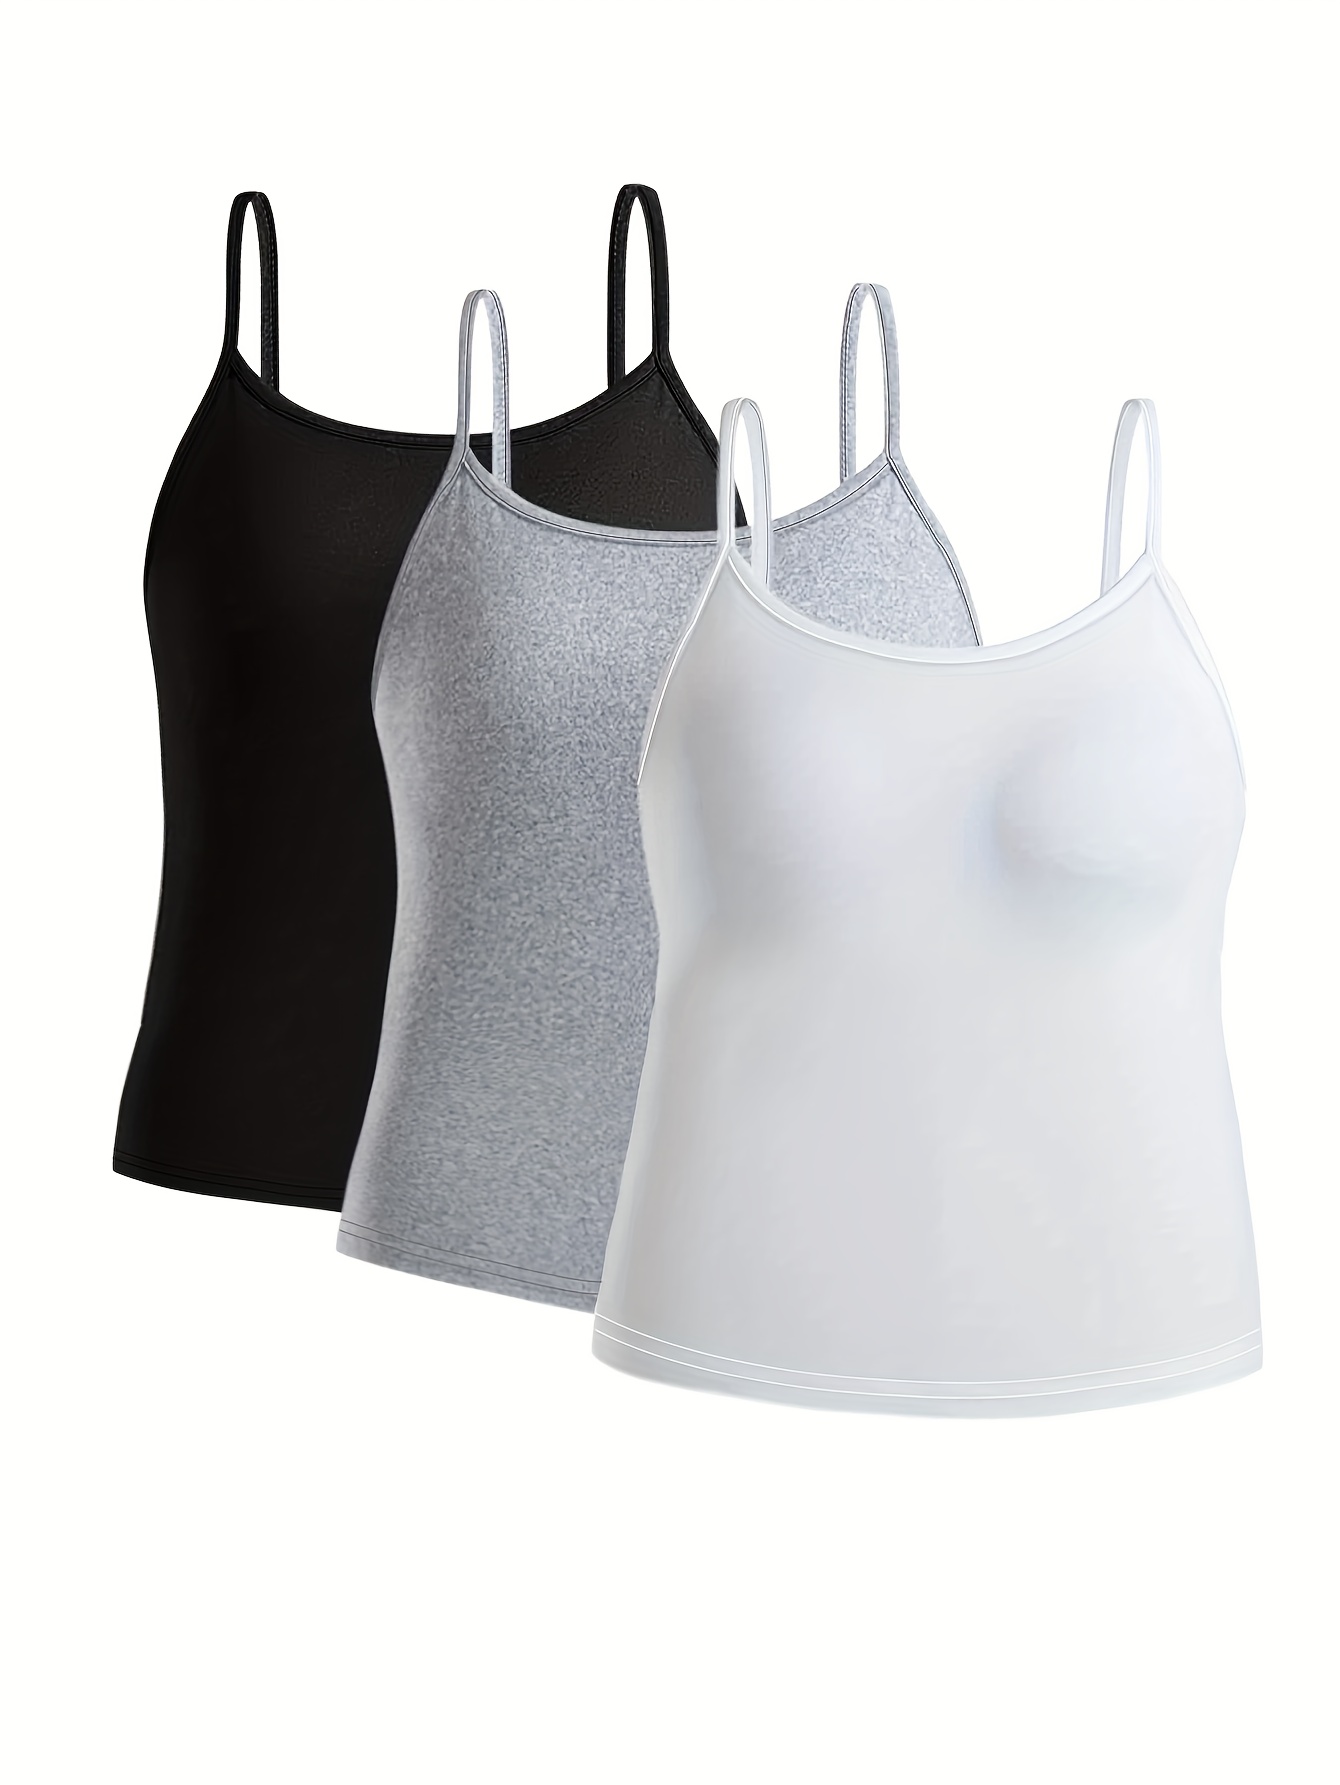 [2 PACK] Women's Long Cami Tank Tops Fit Basic Camisole Top W/ Straps PLUS  SIZES